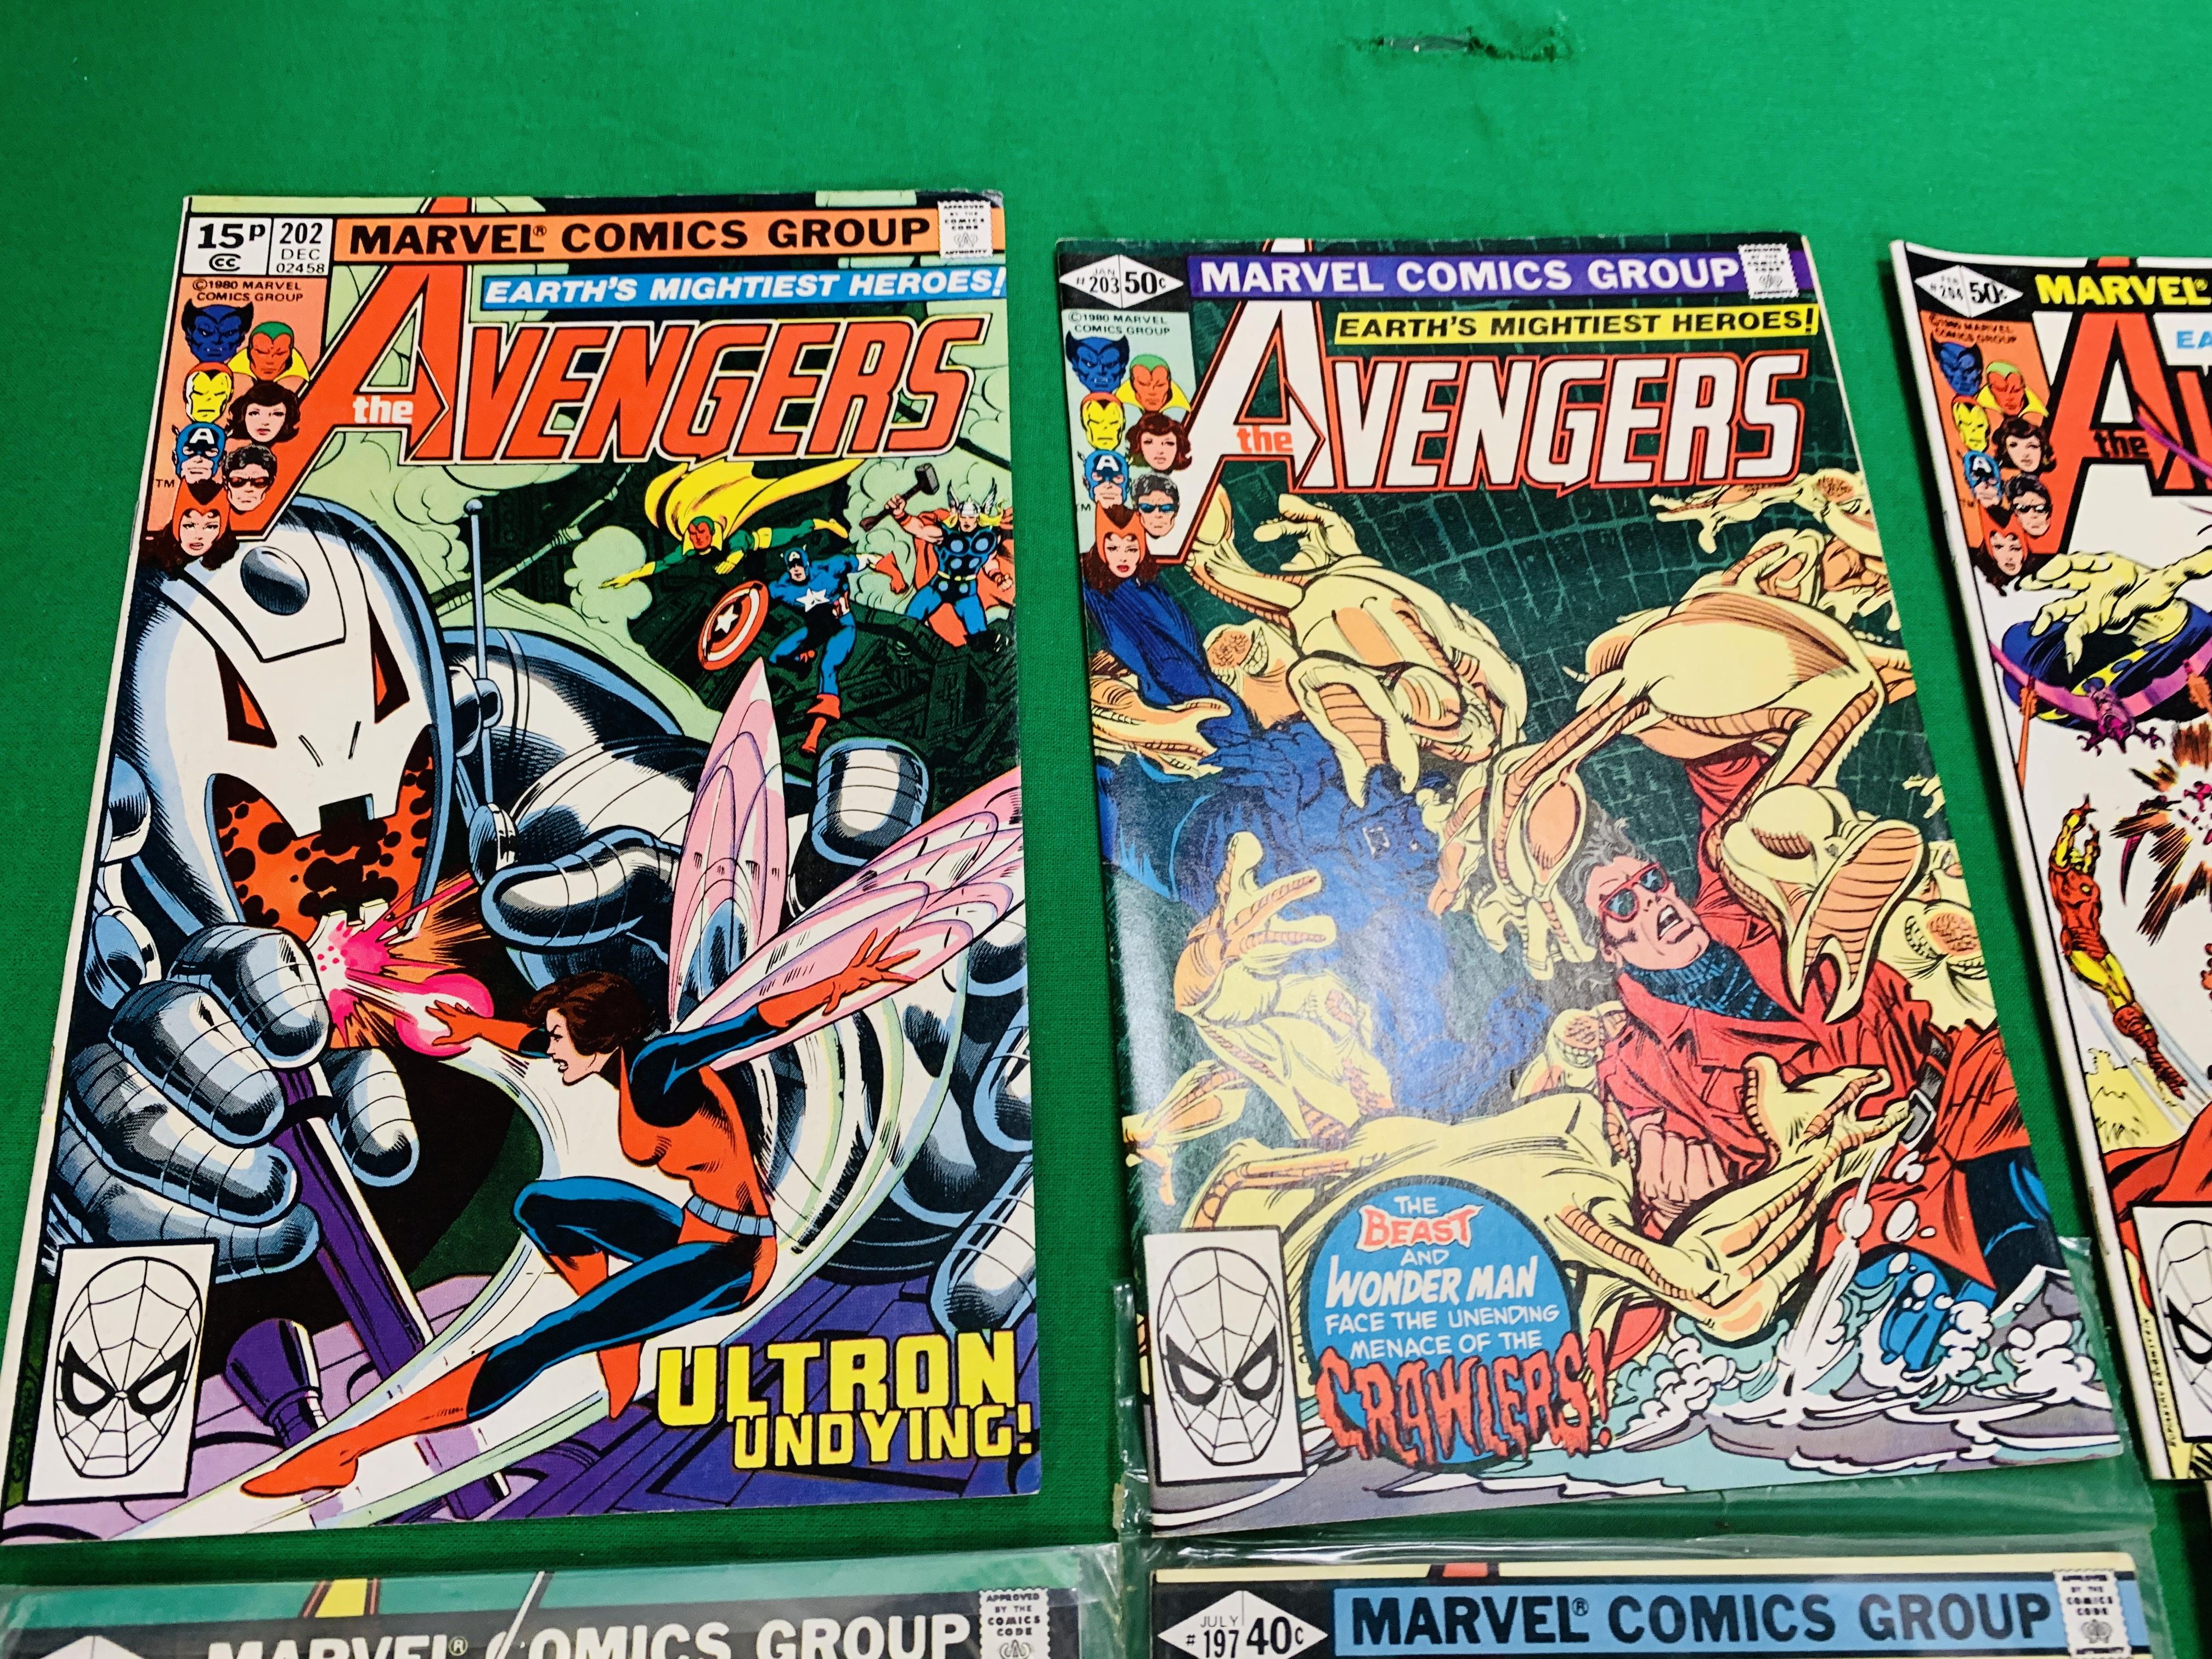 MARVEL COMICS THE AVENGERS NO. 101 - 299, MISSING ISSUES 103 AND 110. - Image 76 of 130